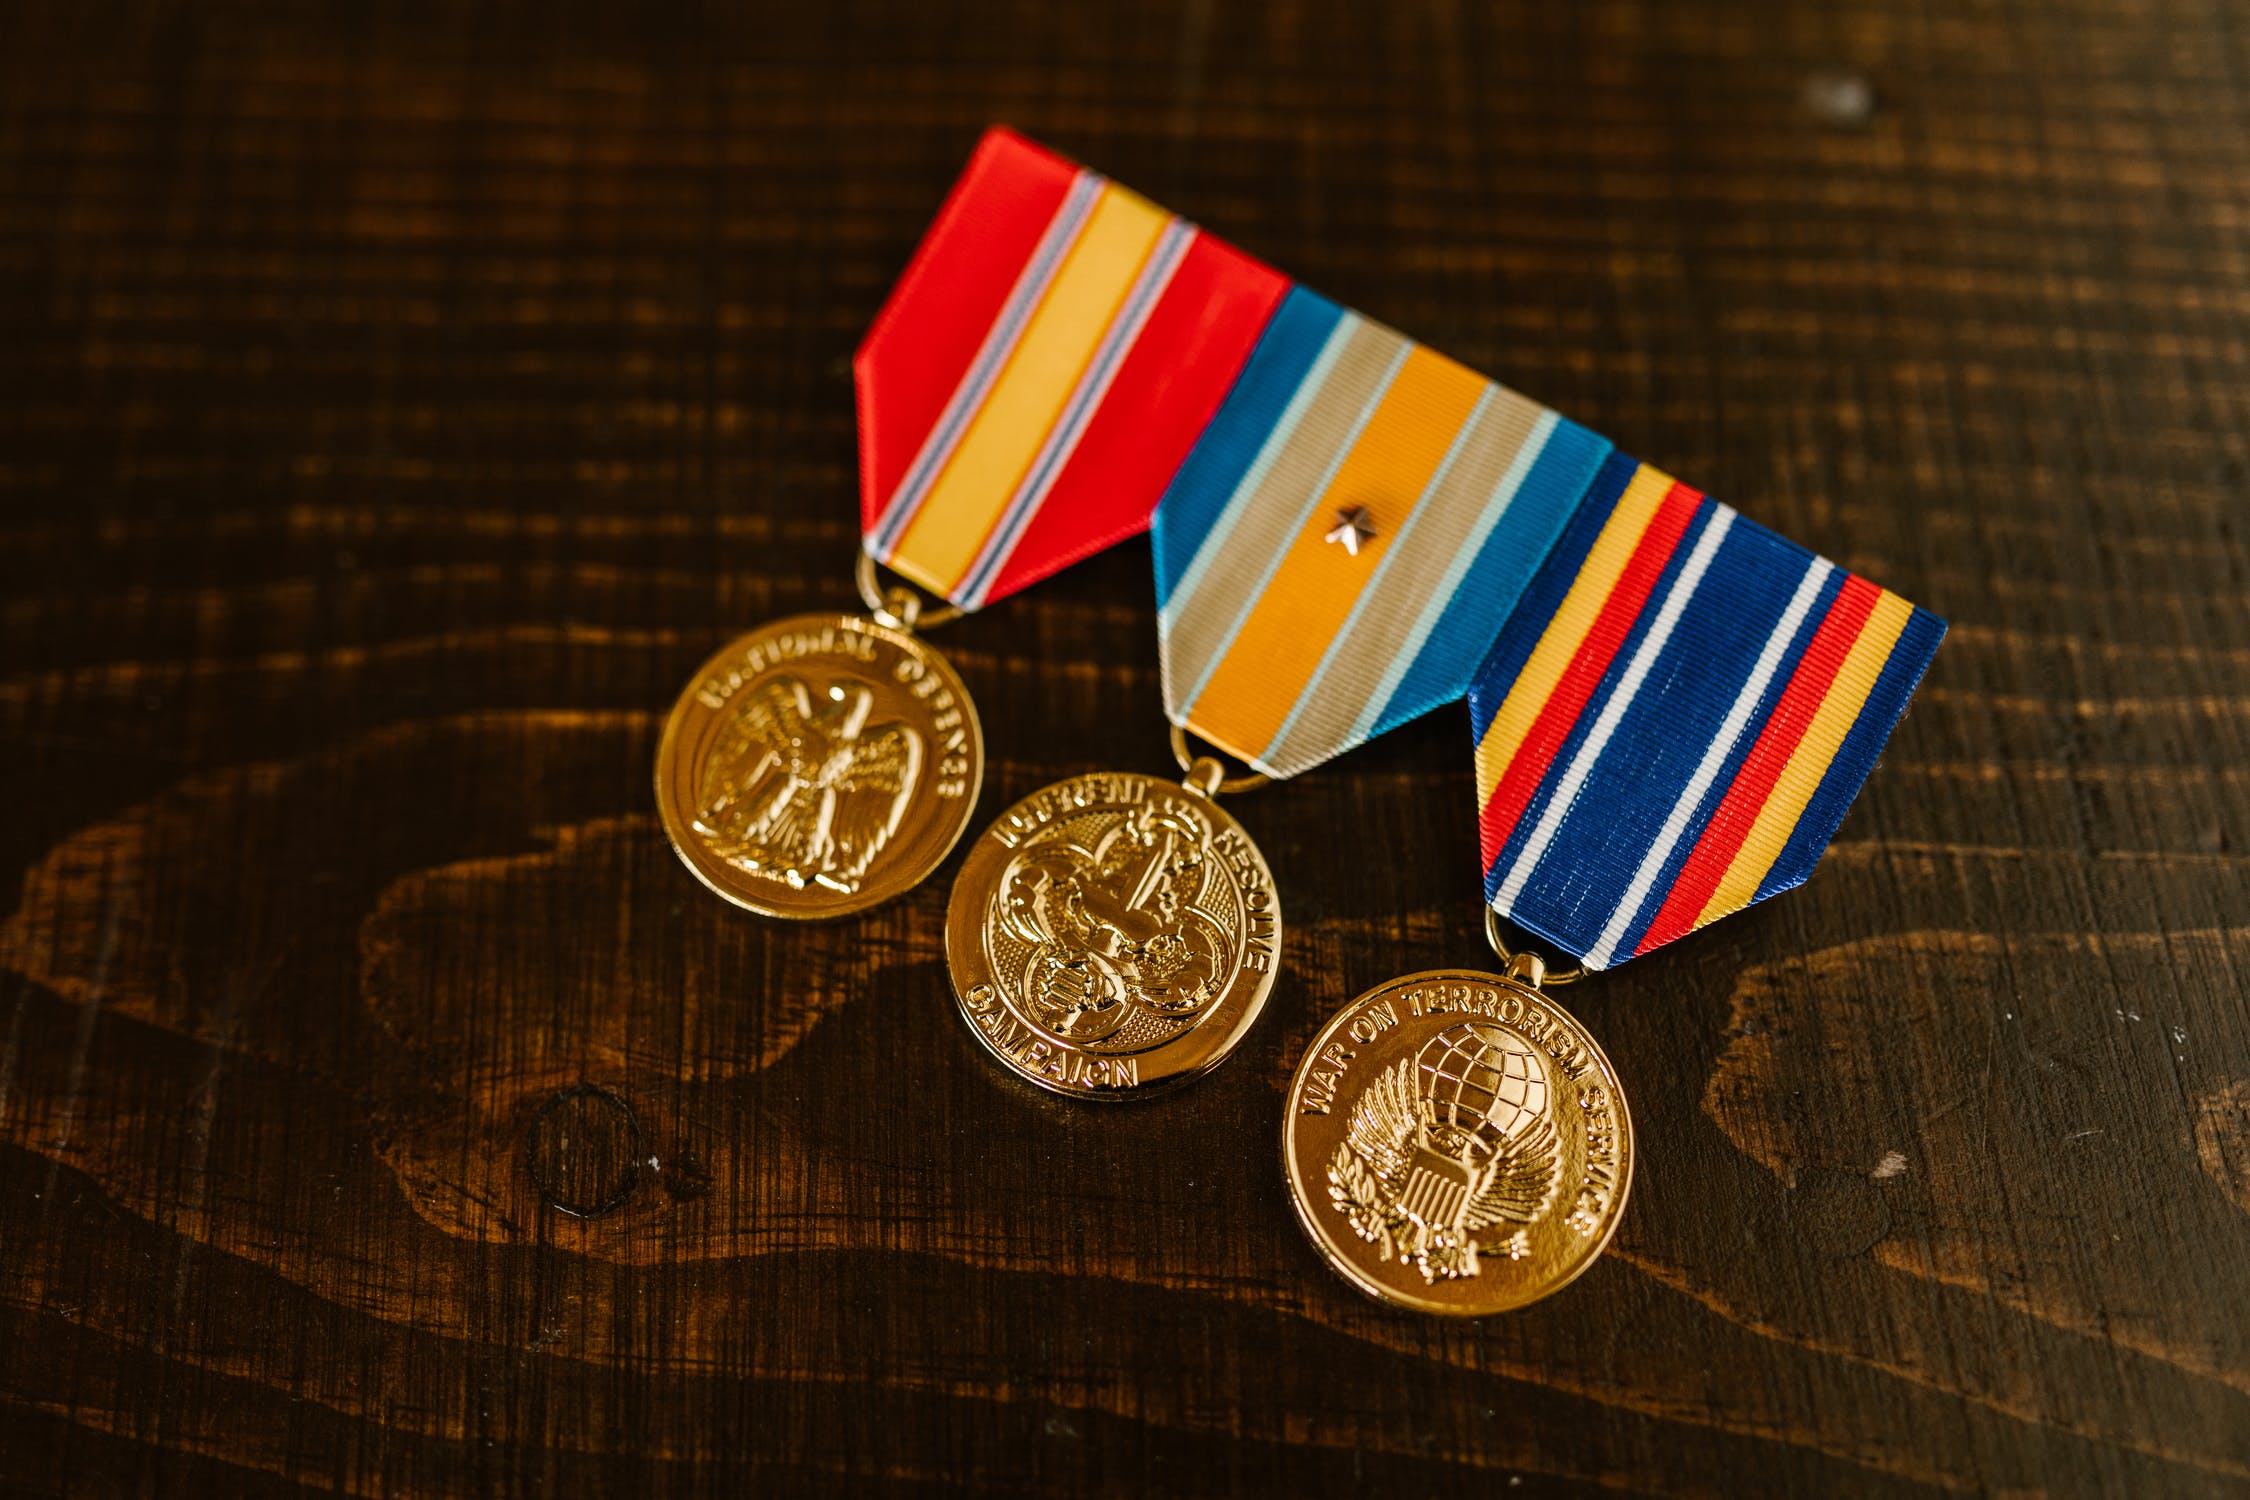 The mayor gave Mrs. Farlow a medal for bravery | Source: Pexels